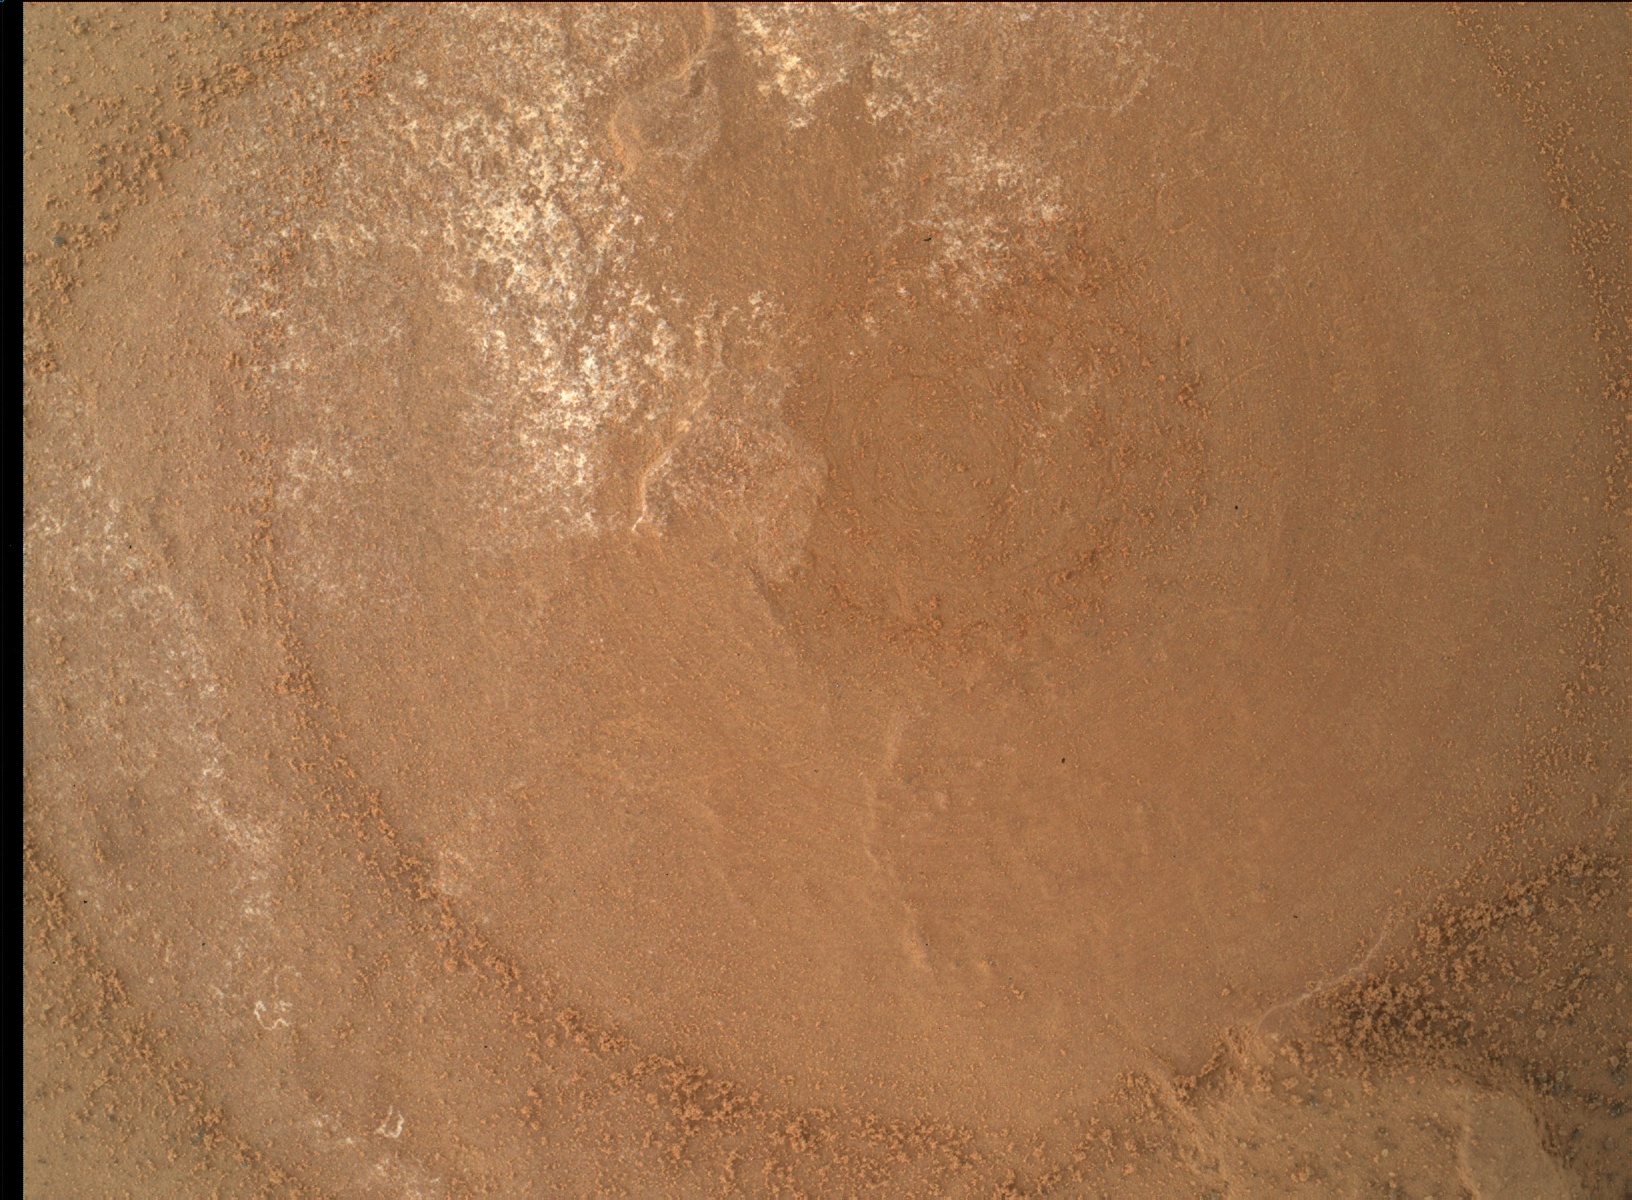 Nasa's Mars rover Curiosity acquired this image using its Mars Hand Lens Imager (MAHLI) on Sol 1806